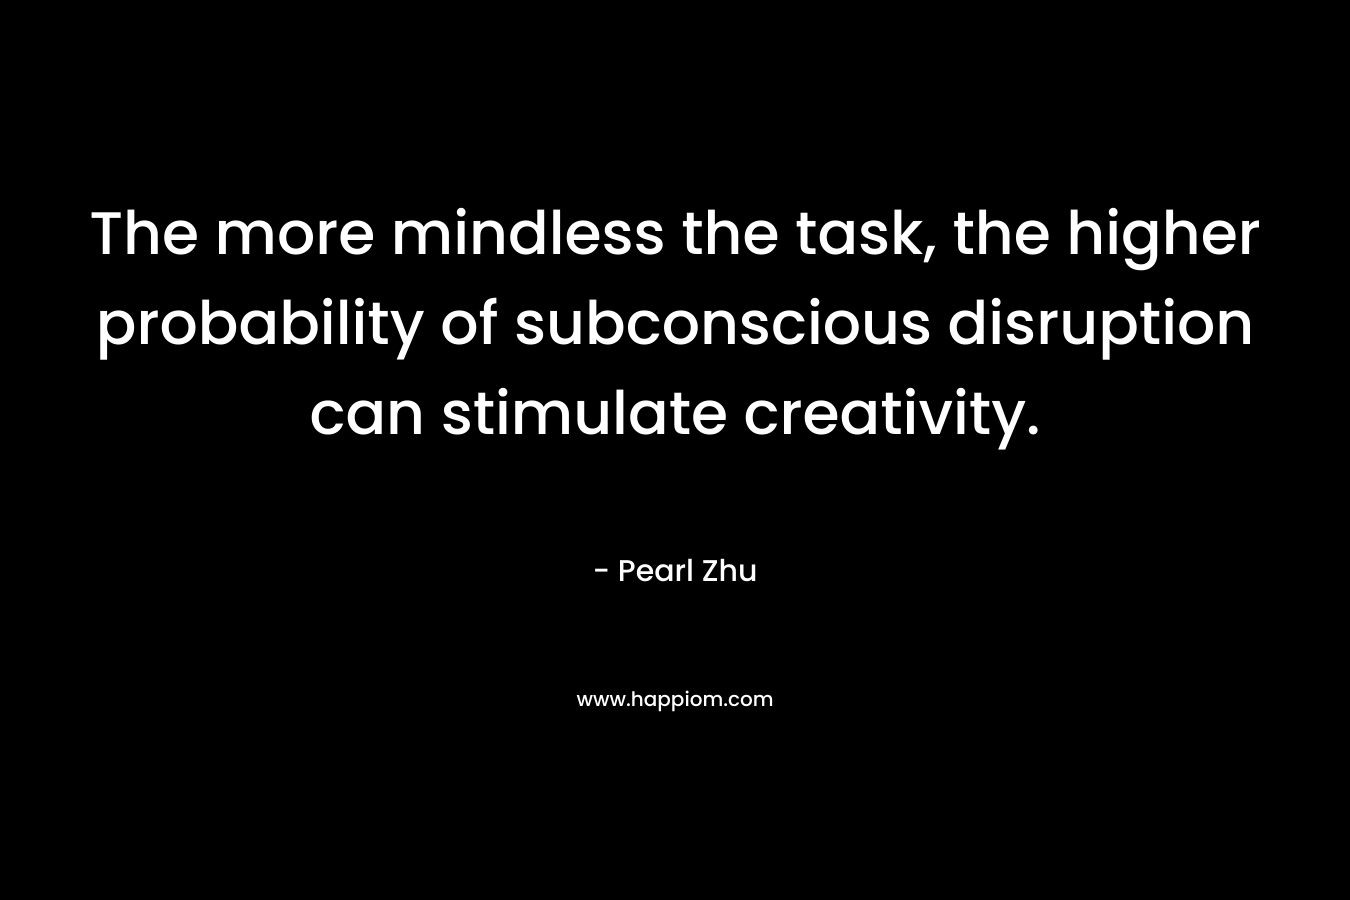 The more mindless the task, the higher probability of subconscious disruption can stimulate creativity.